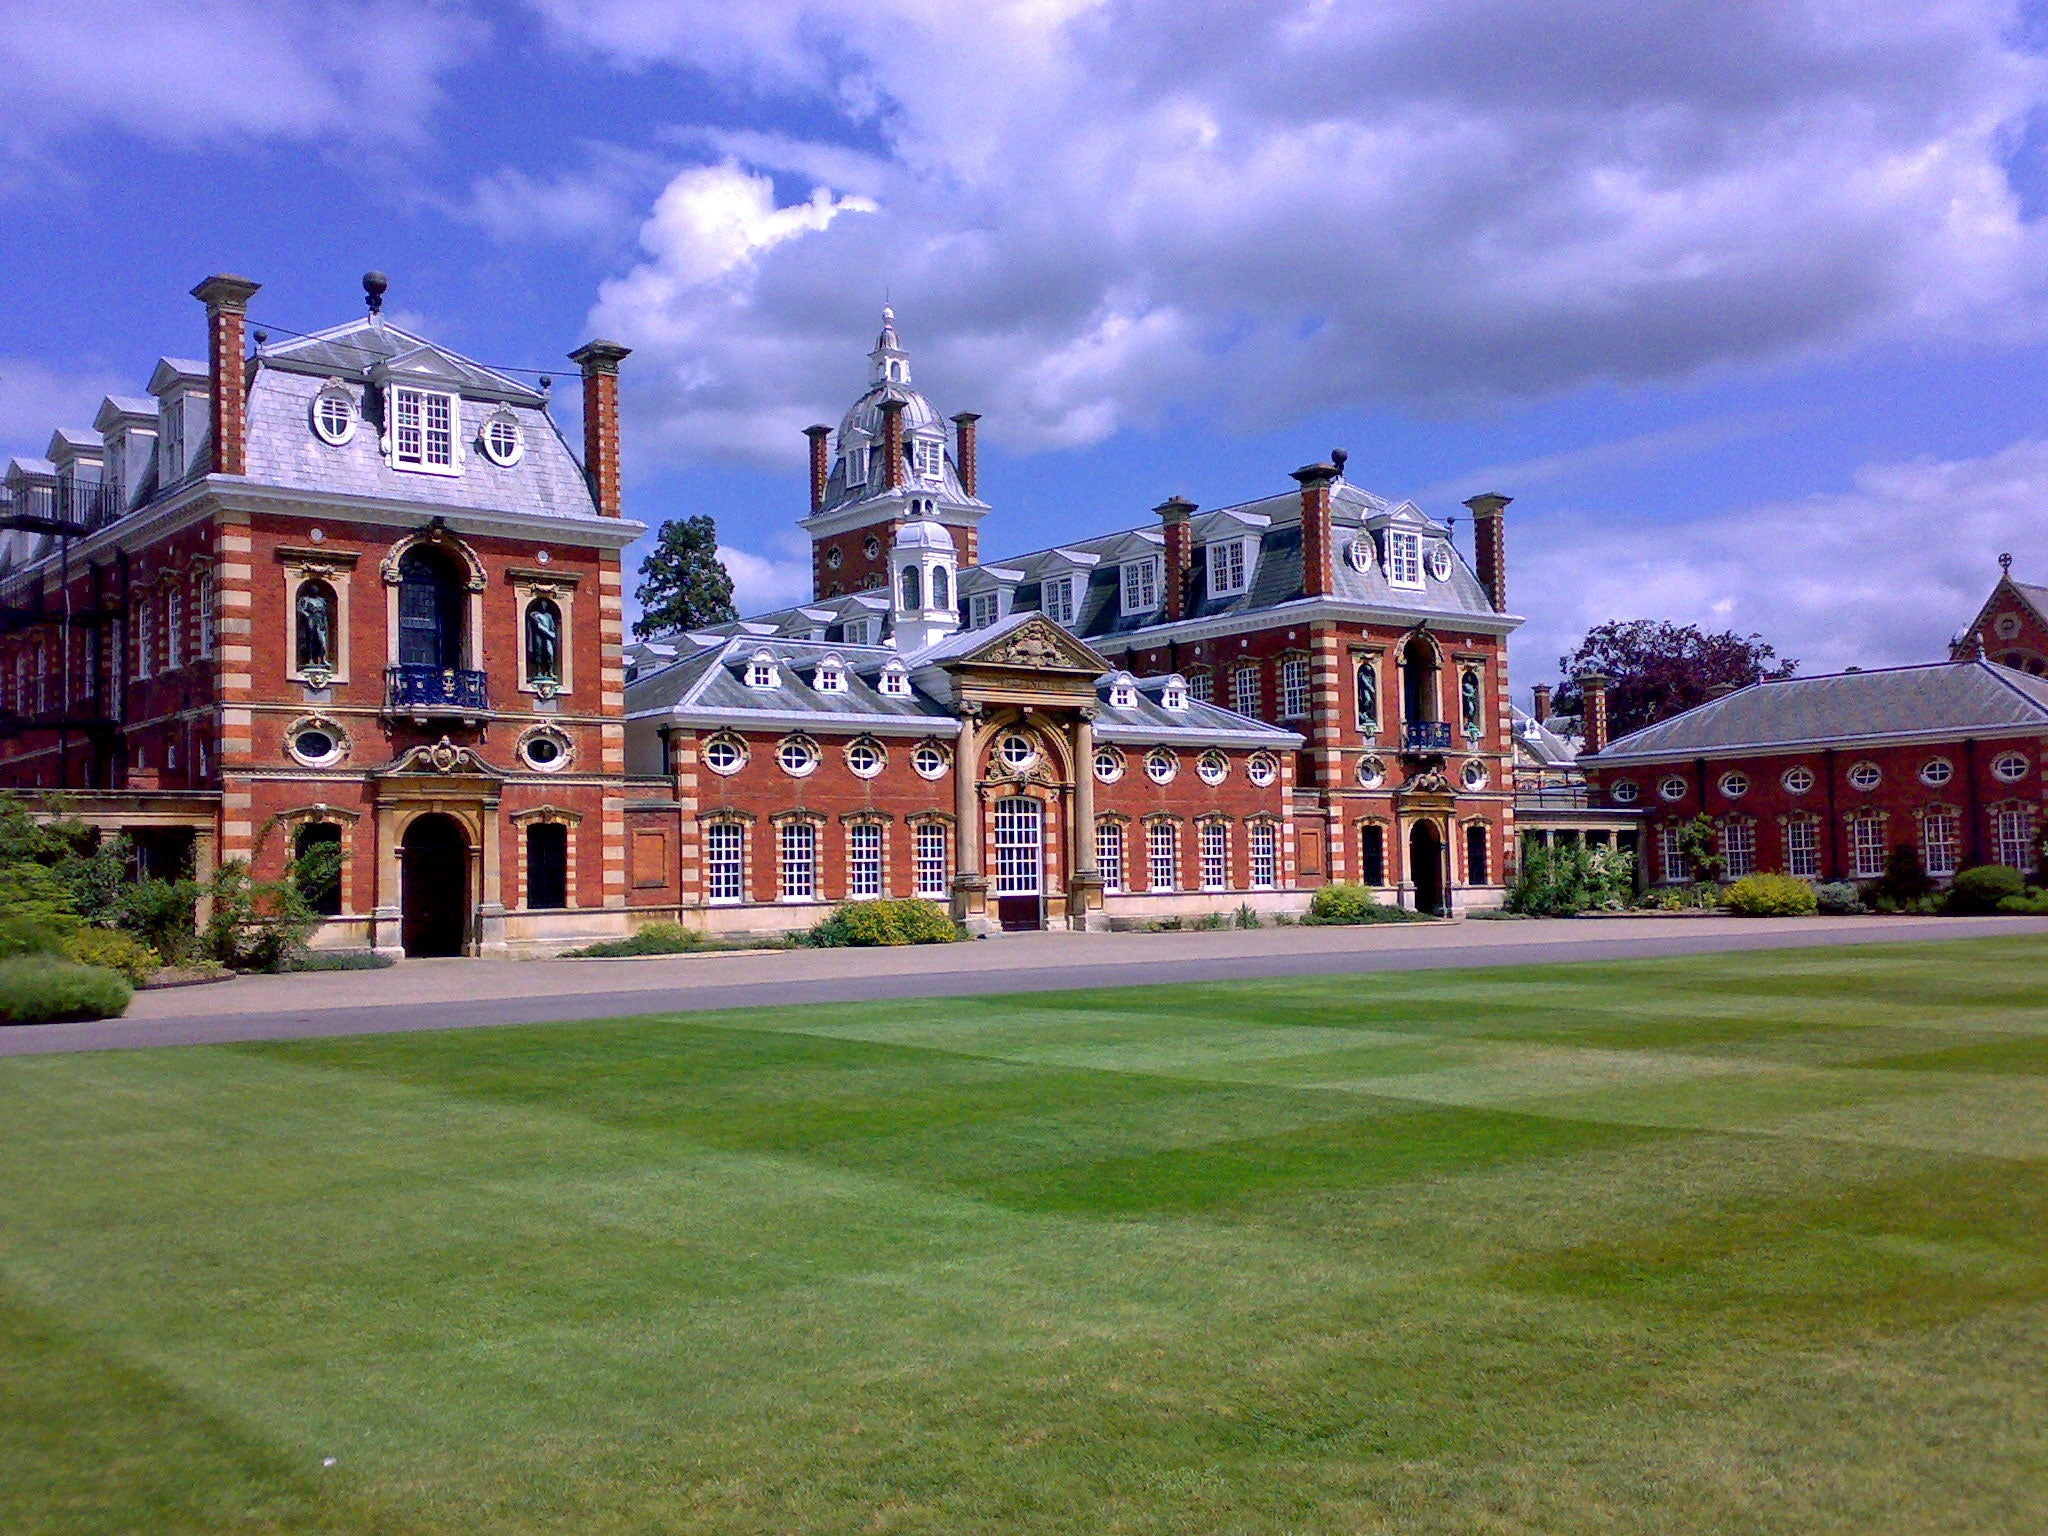 The headmaster of Wellington College (pictured), Dr Anthony Seldon, has called for a set of radical proposals to close the gap between state and independent schools